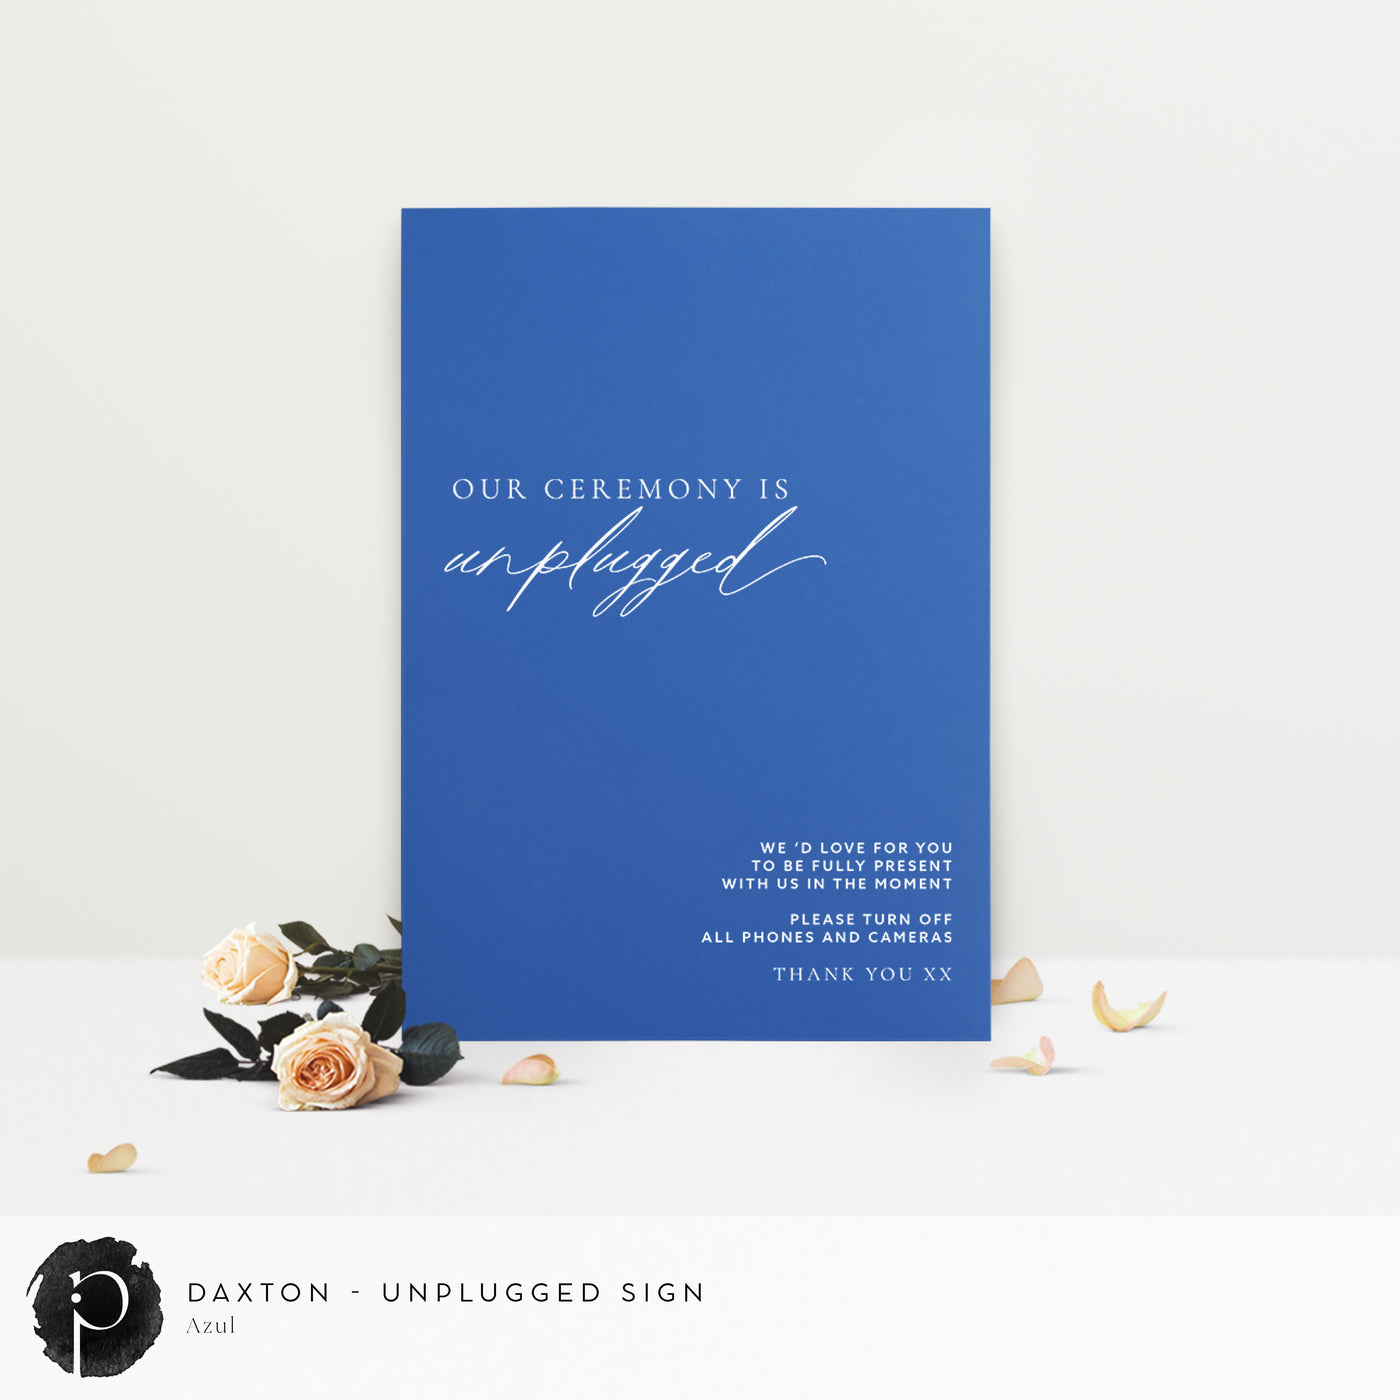 Daxton - Unplugged Ceremony Sign